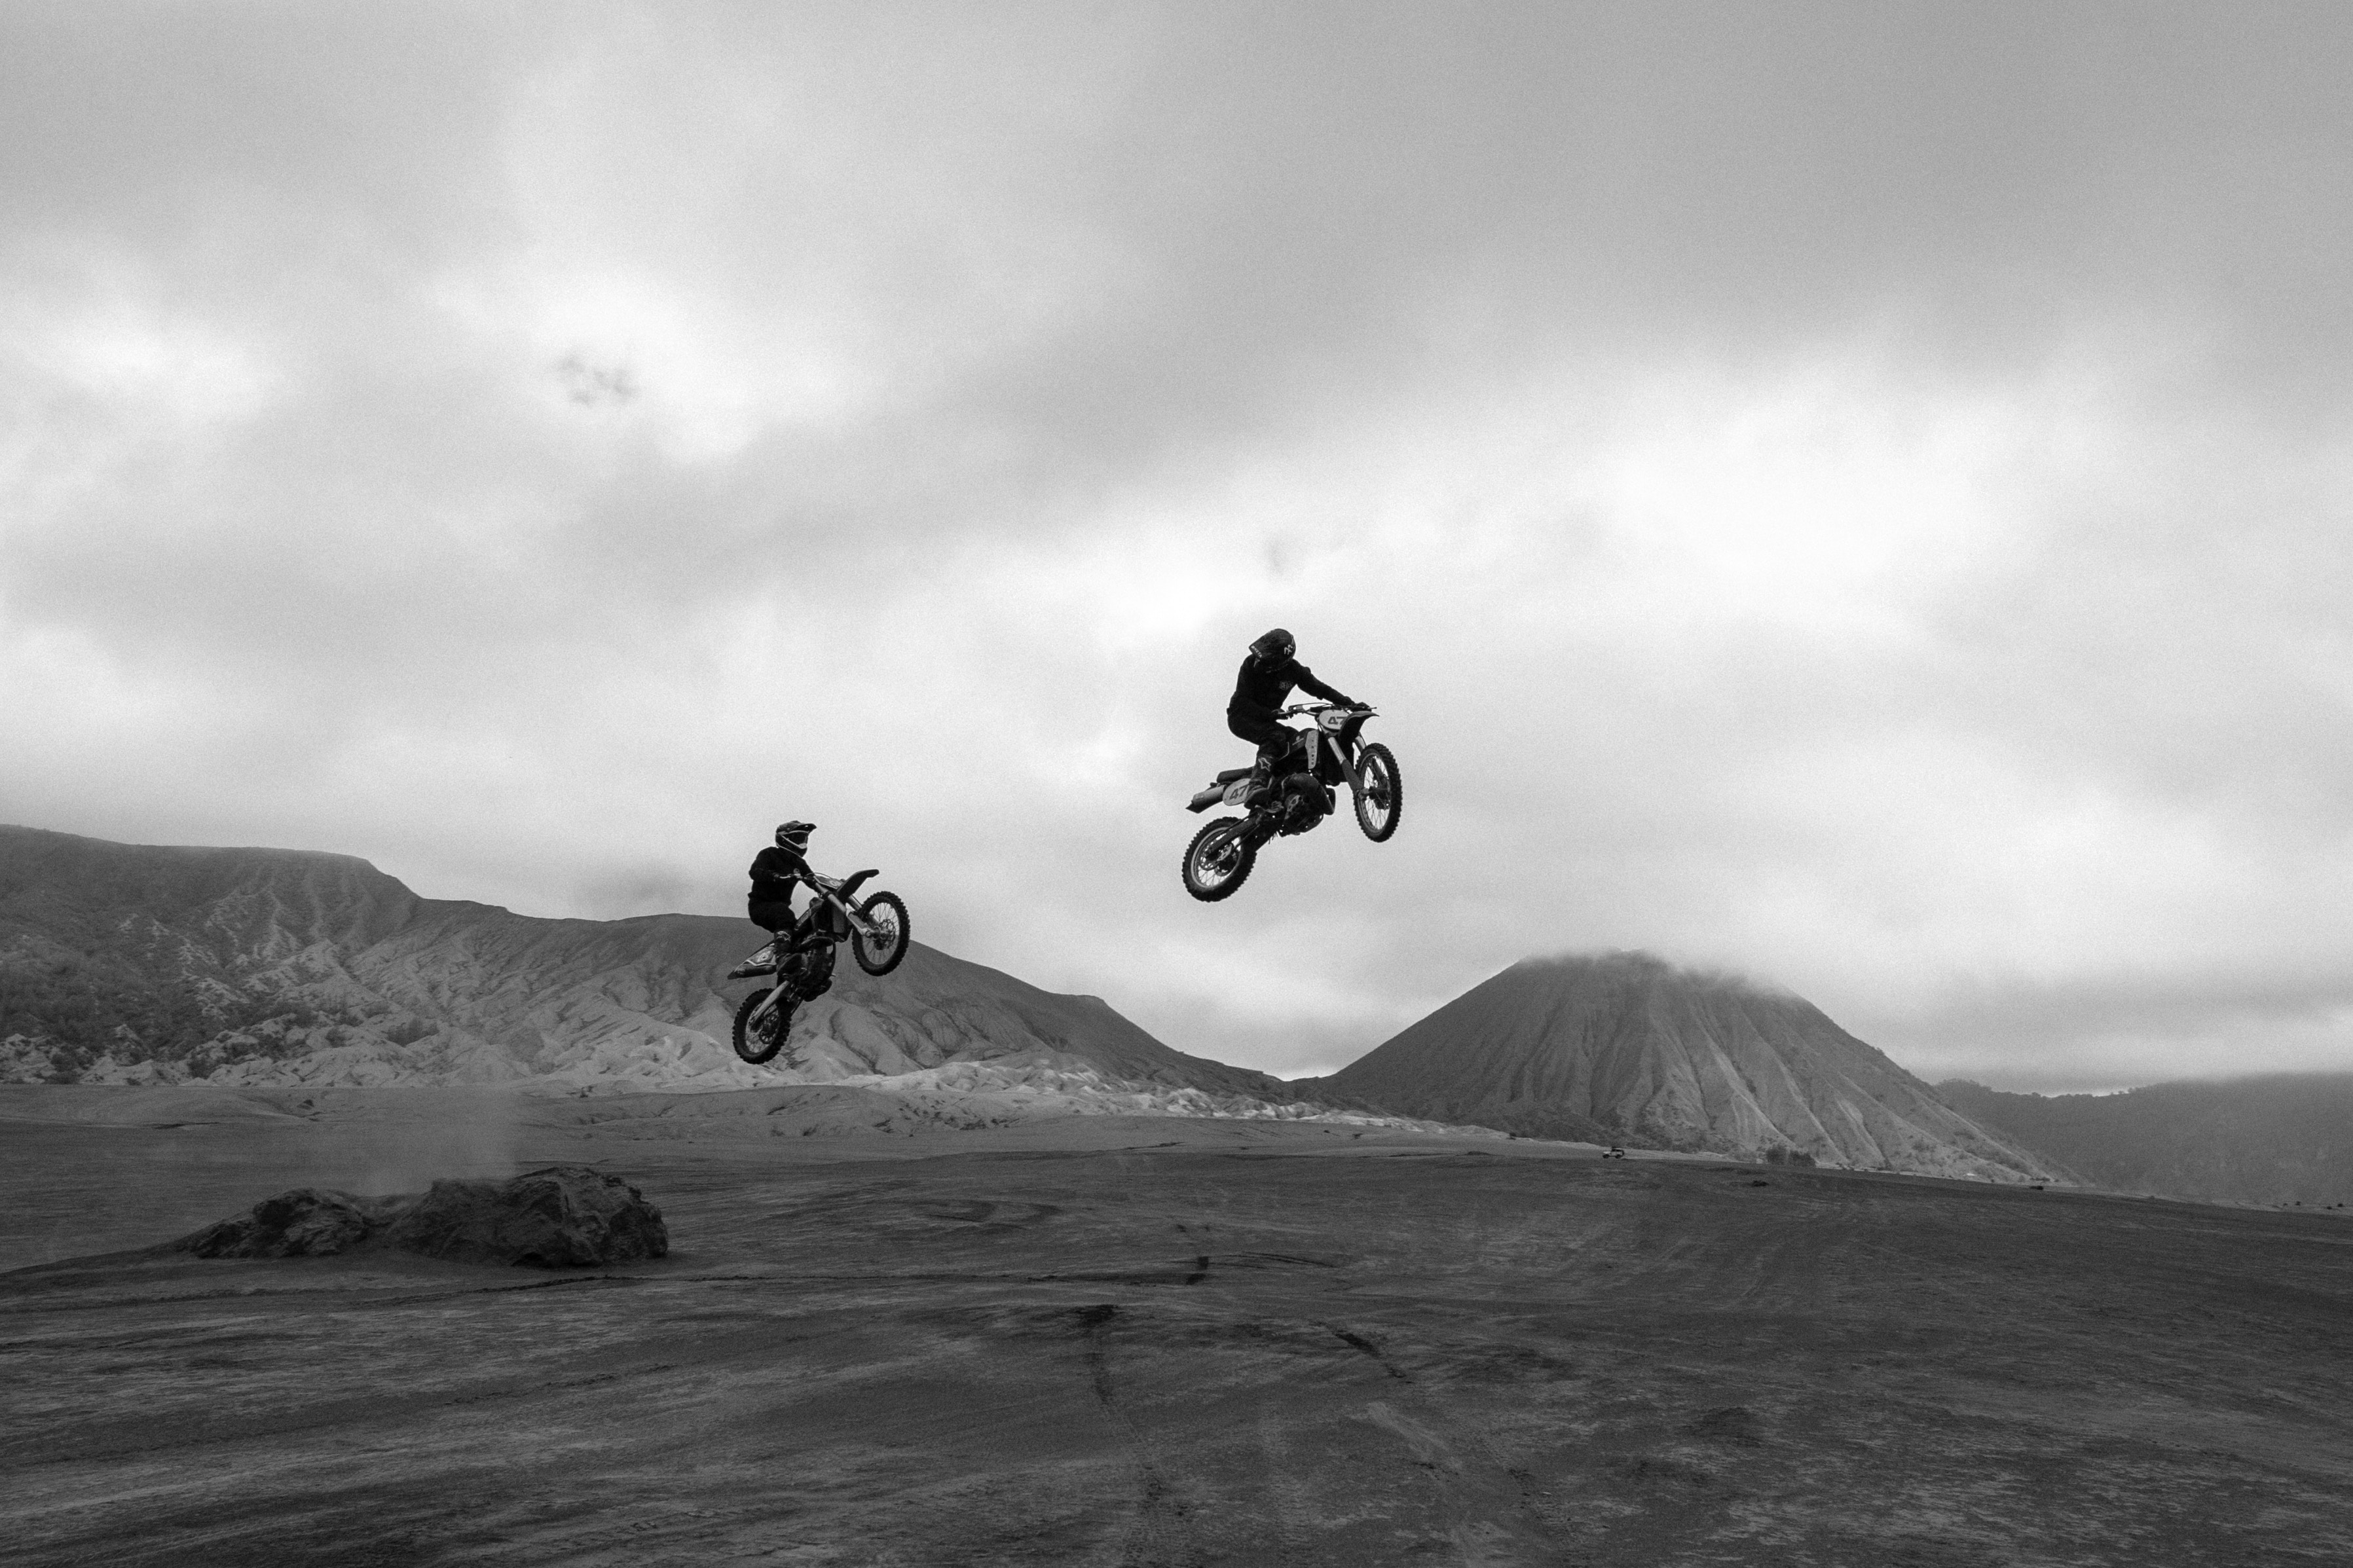 Two dirt bike riders take a jump in an old gravel pit, soaring through the air.